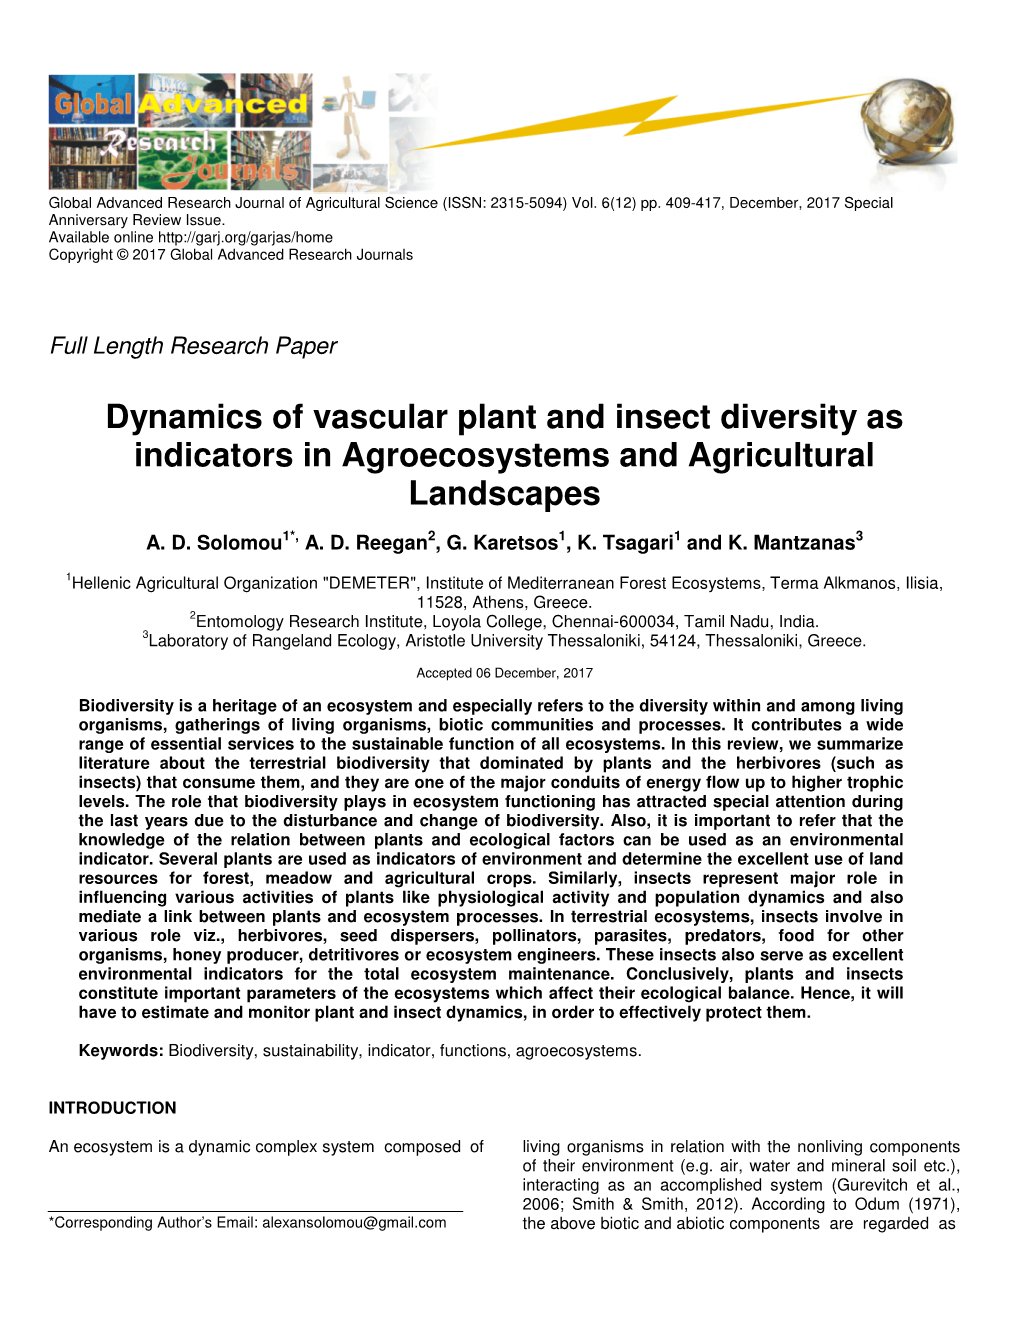 Dynamics of Vascular Plant and Insect Diversity As Indicators in Agroecosystems and Agricultural Landscapes